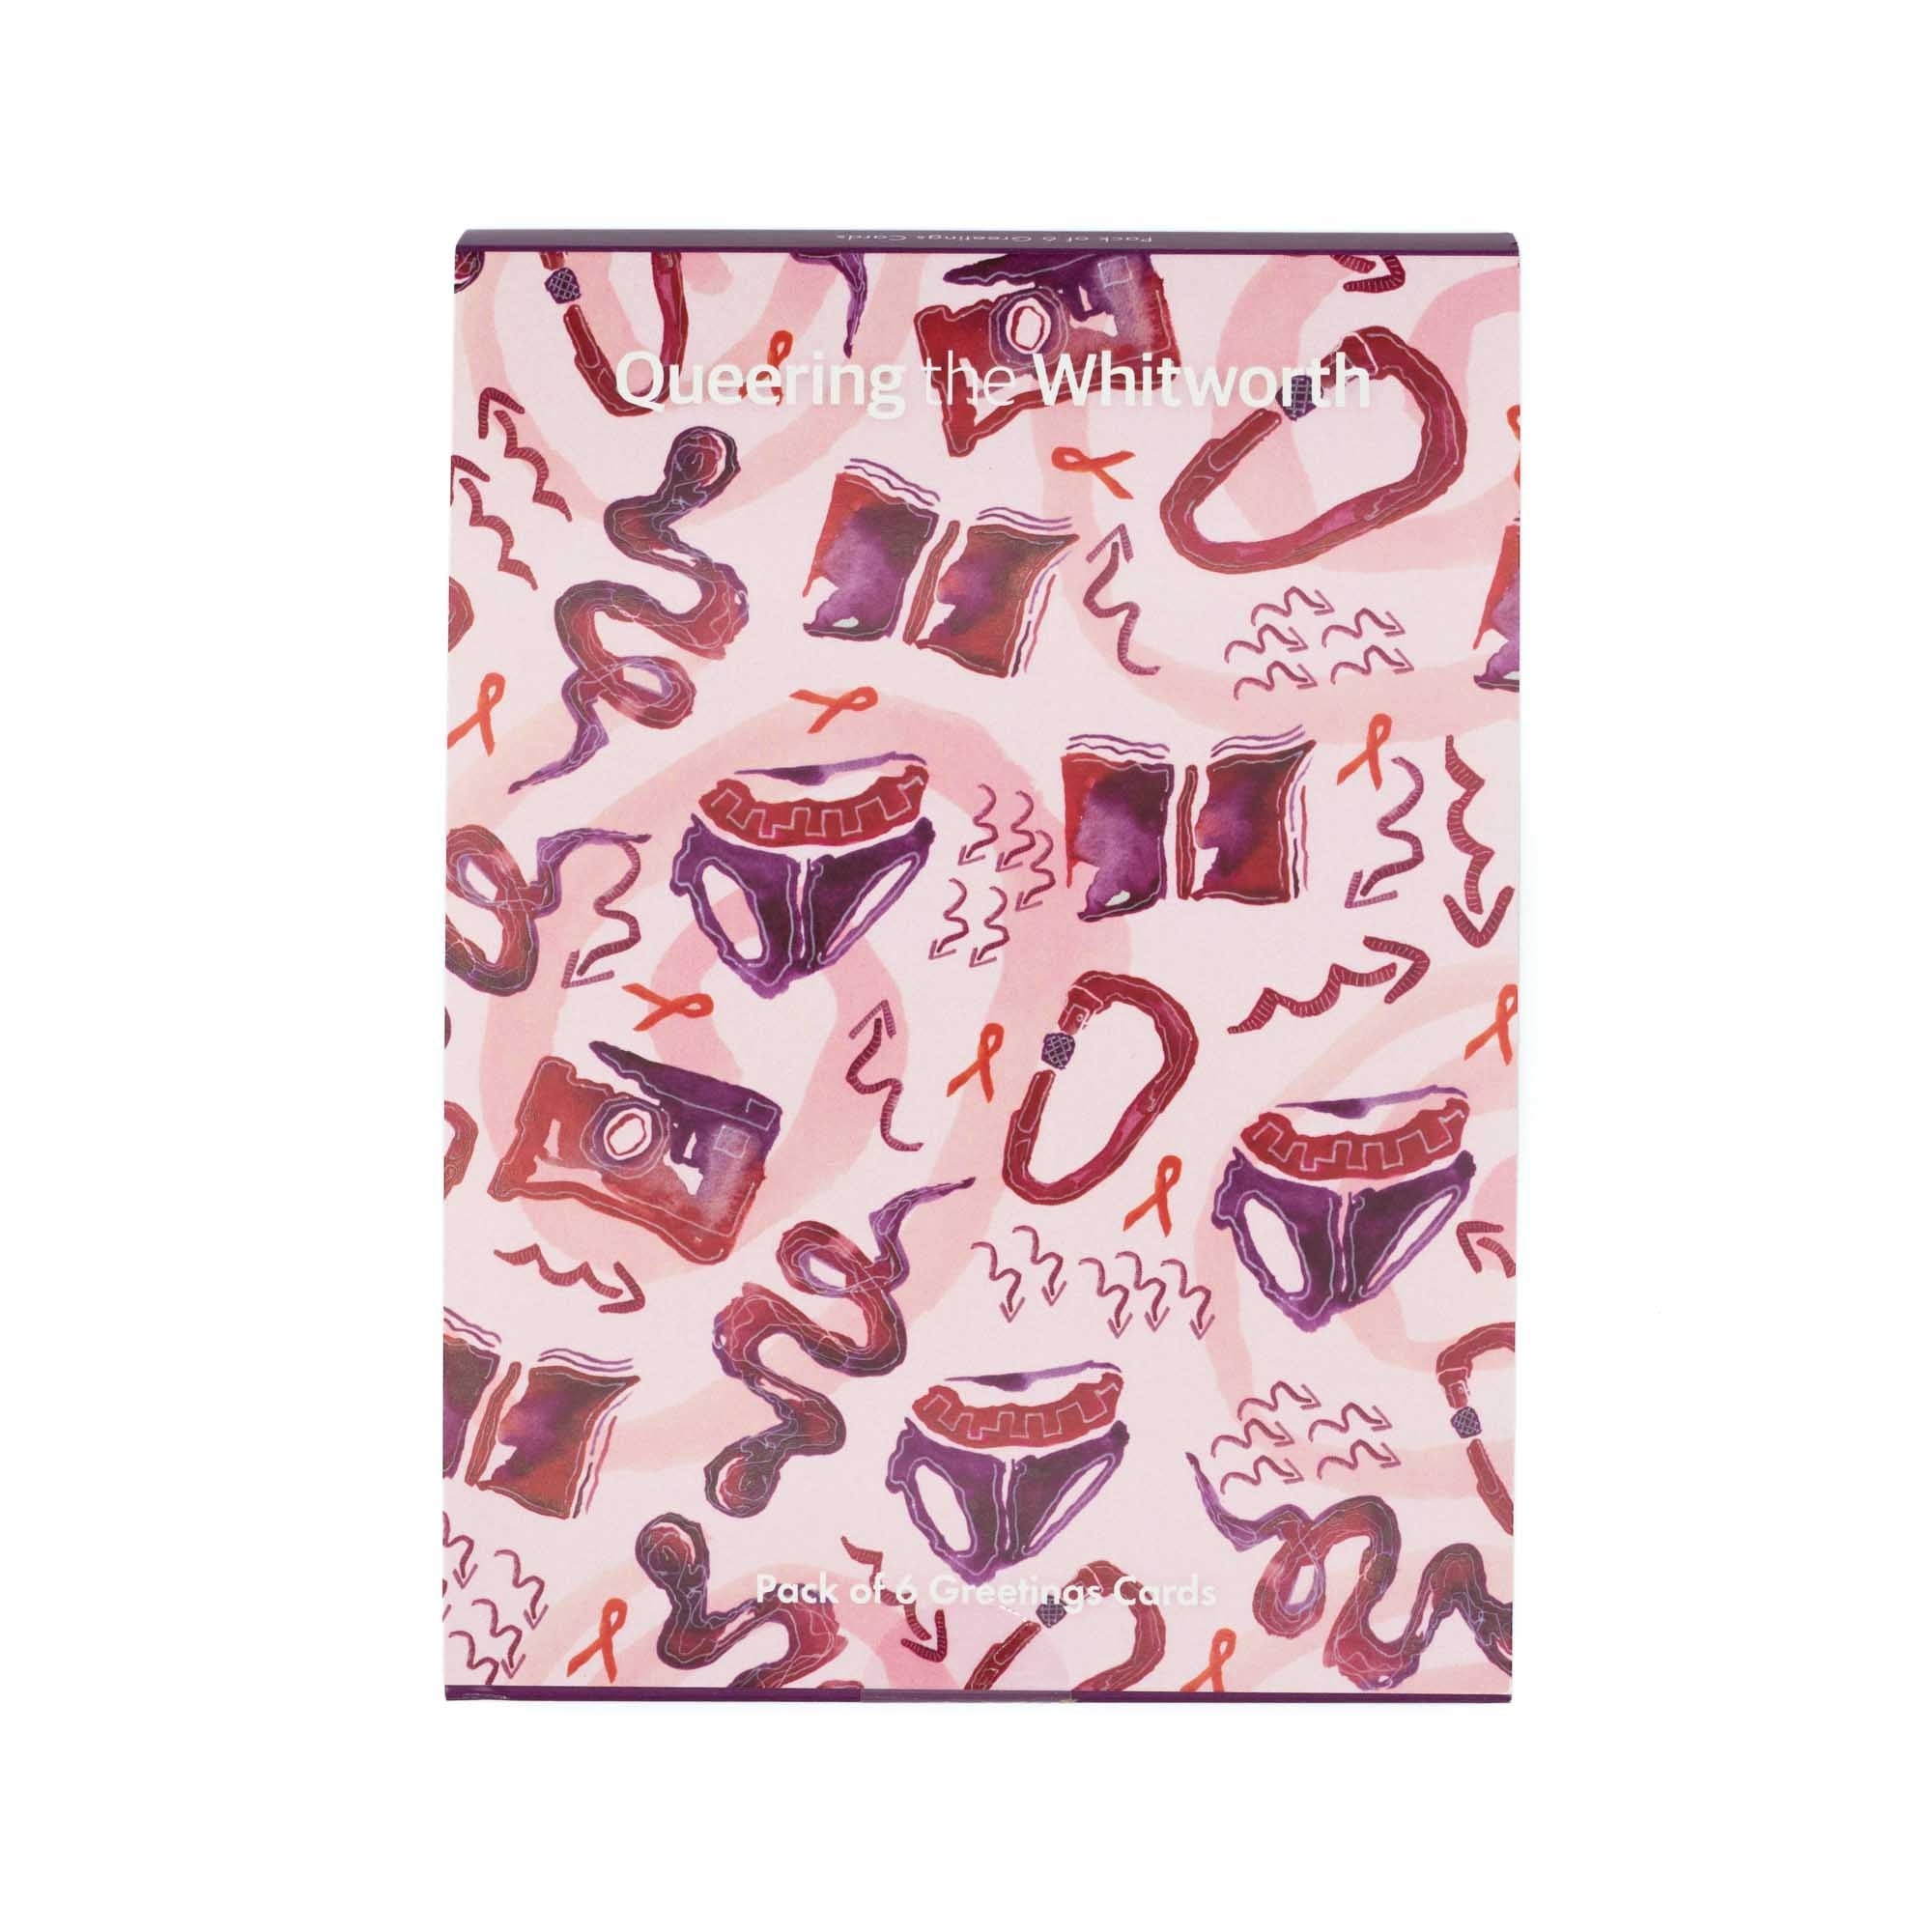 The outside packaging of a set of greetings cards featuring a design by Sarah-Joy Ford againt a white background. Pink, red and purple pattern design. White background.